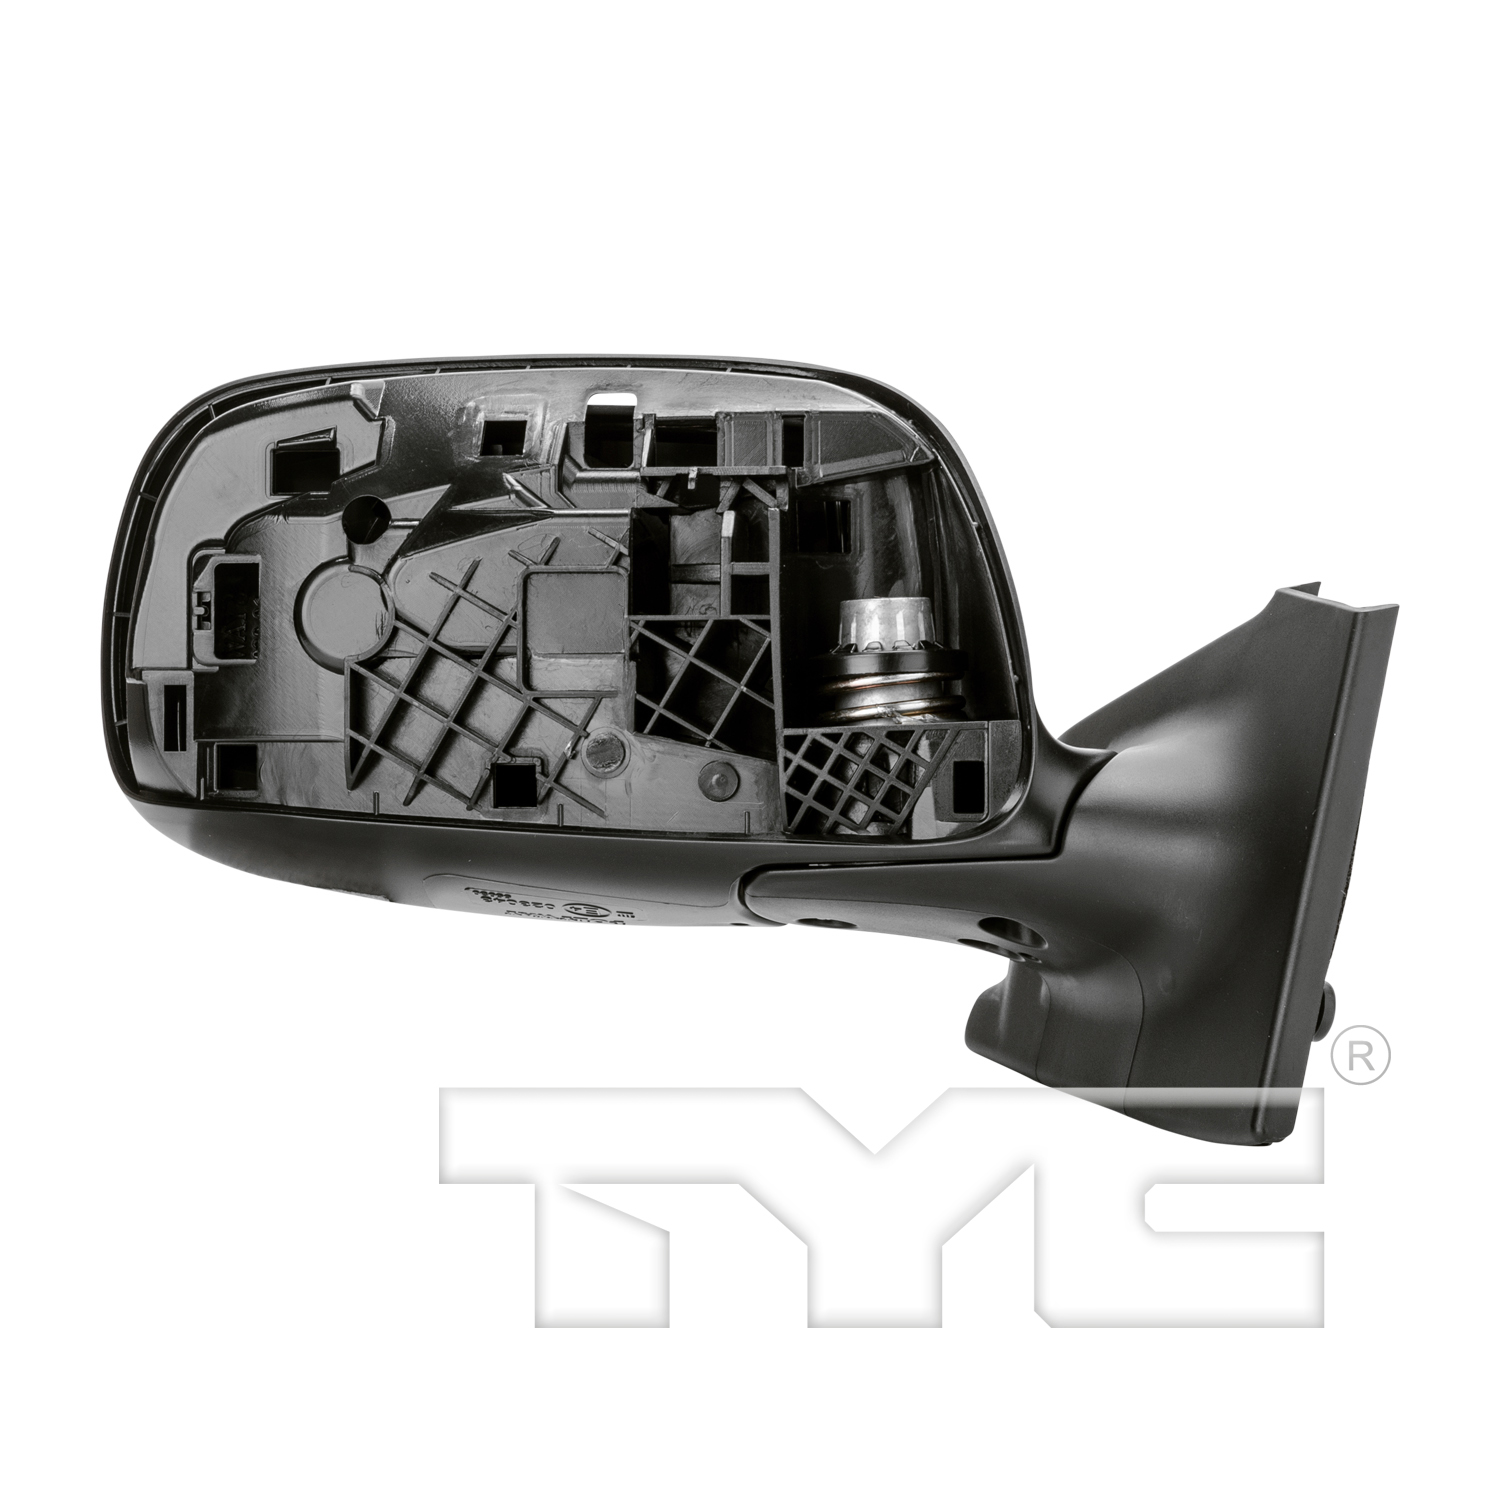 Aftermarket MIRRORS for TOYOTA - YARIS, YARIS,06-11,RT Mirror outside rear view